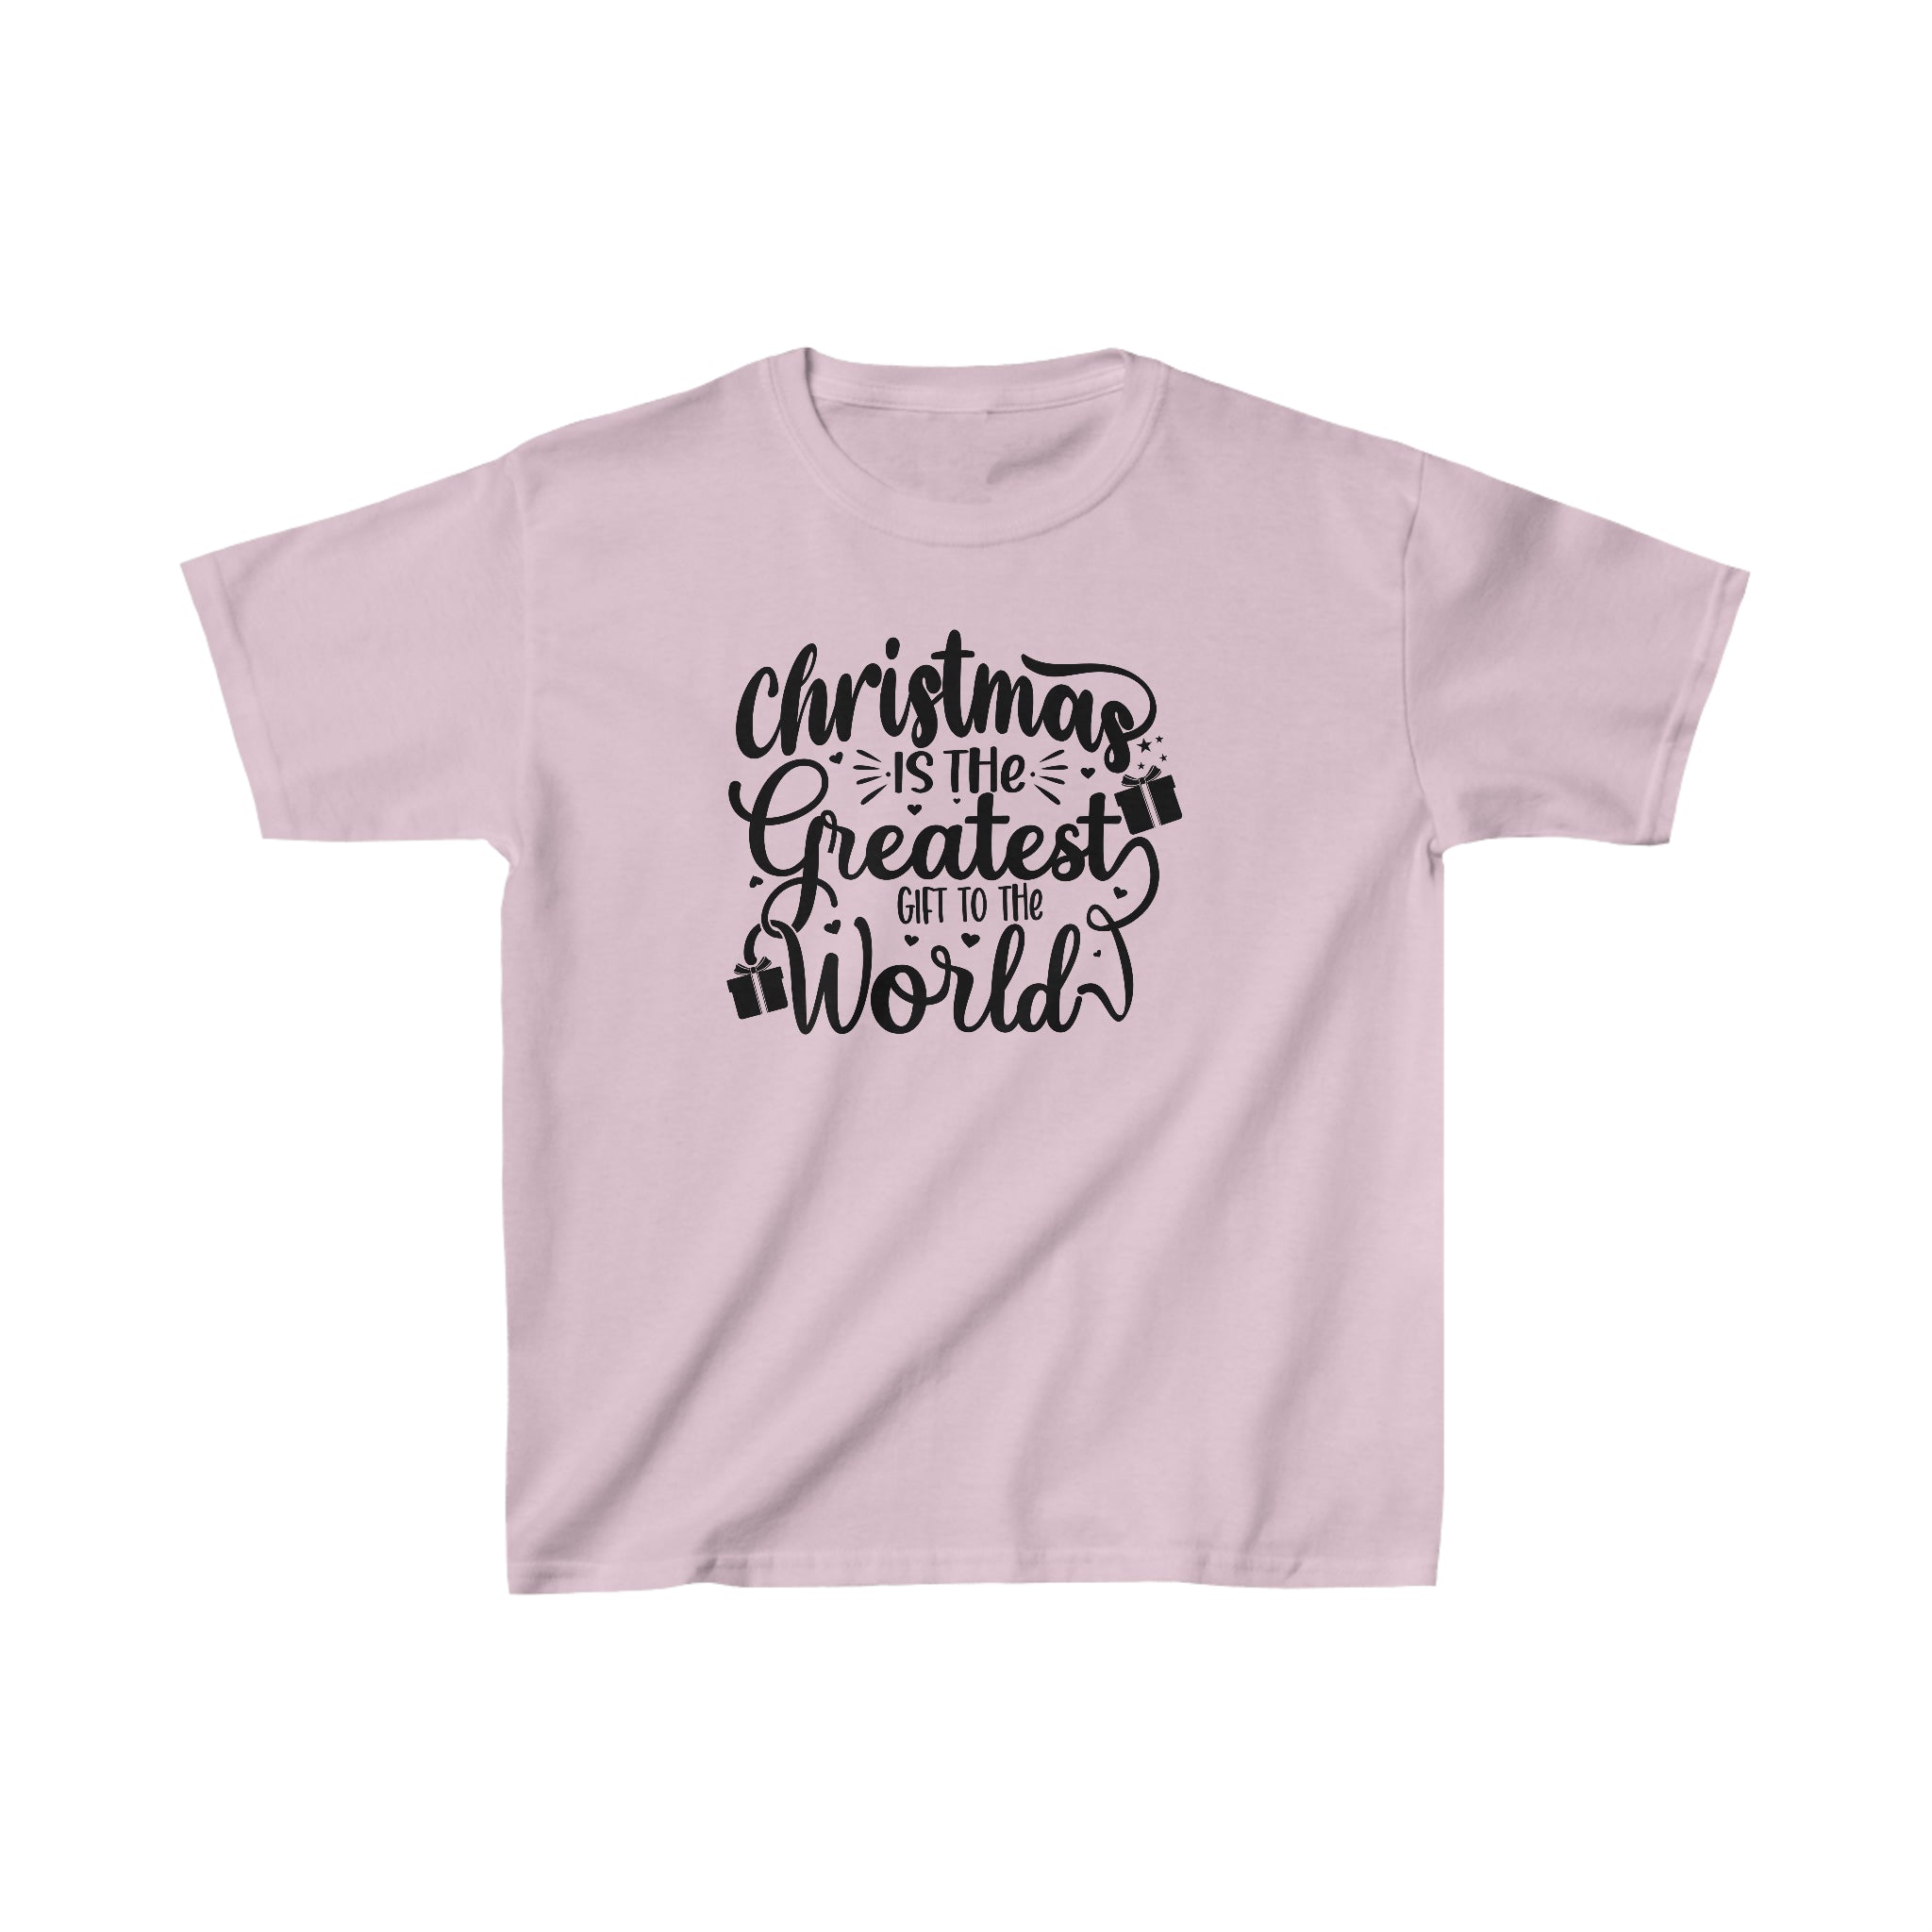 The greatest gift to the world Kids Christmas Tee, Kids Christmas T-shirt, Merry Christmas Kids T-shirt, Unisex Kids T-shirts, Unisex jersey short sleeve kids tee